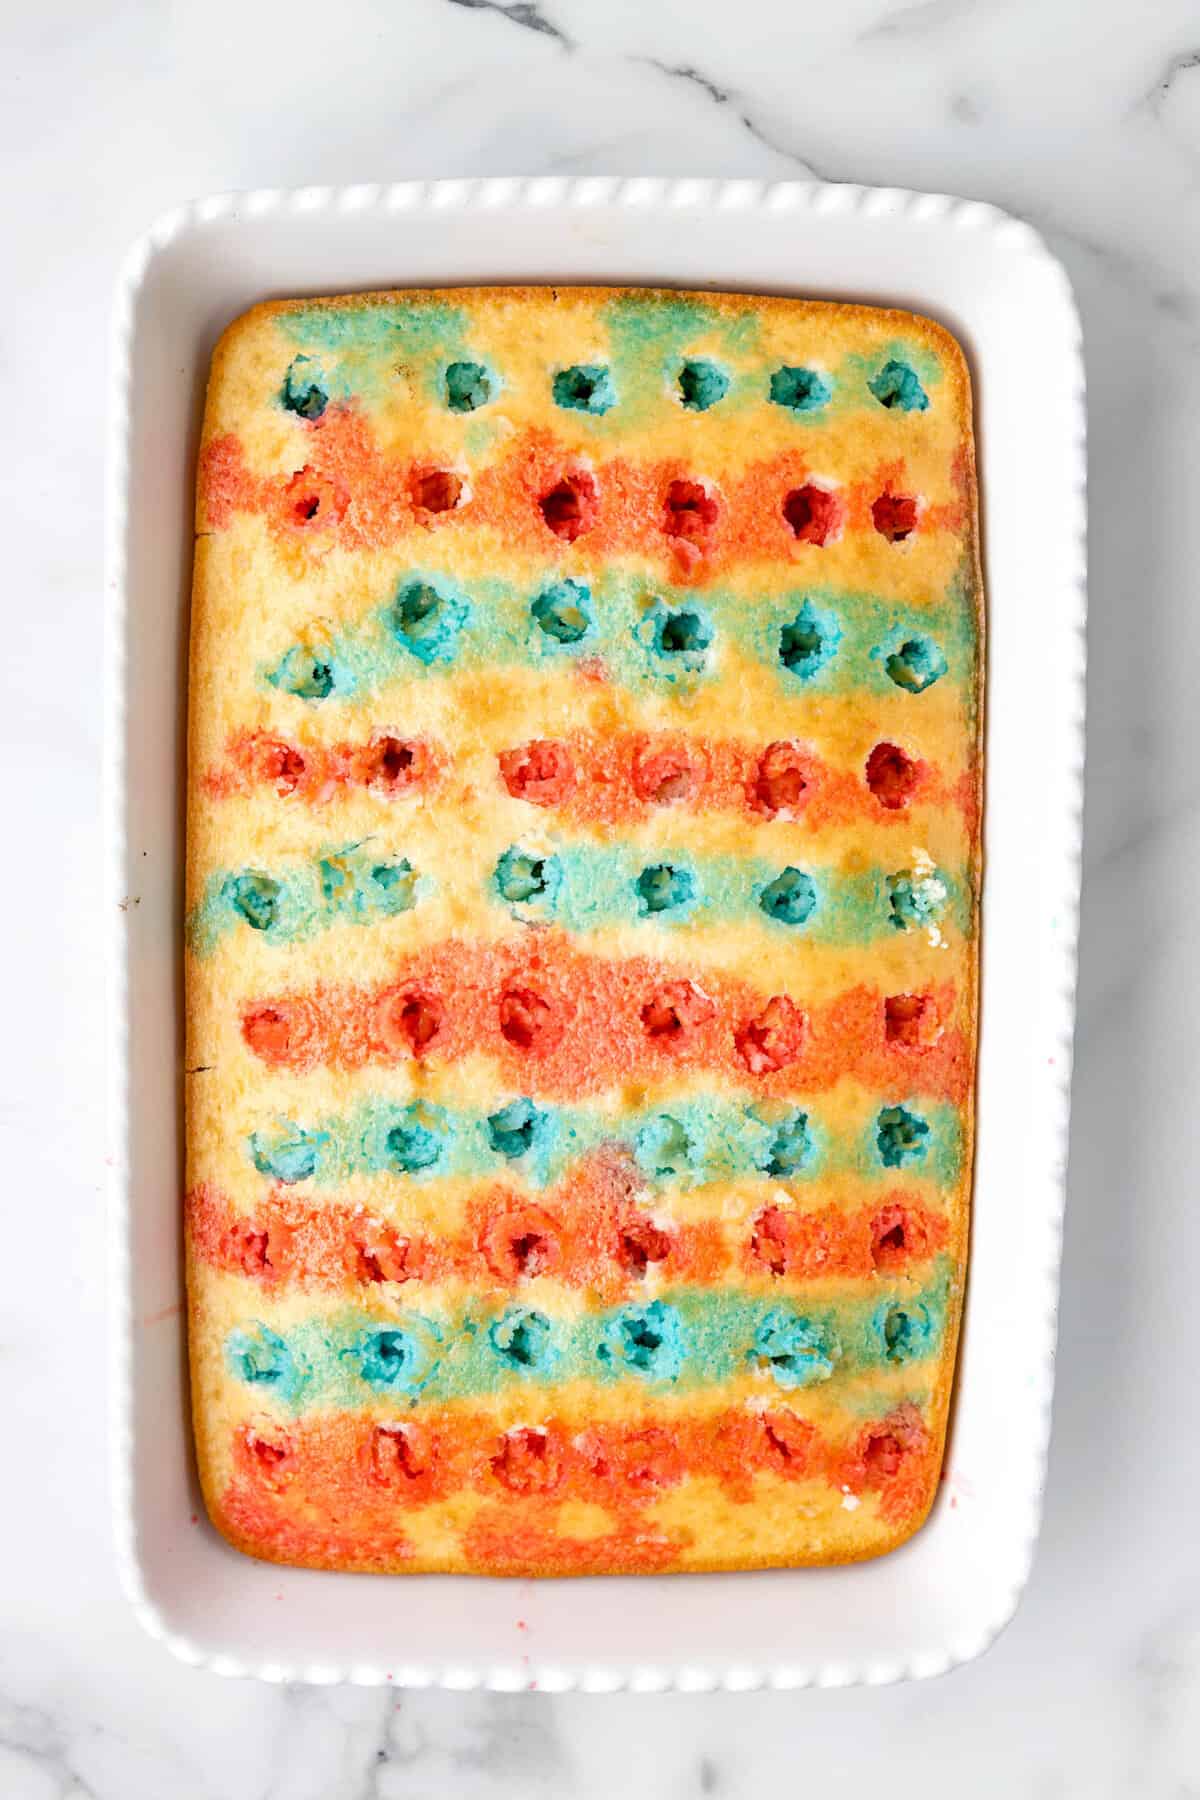 Red and blue jello in a pattern to fill holes in white cake for 4th of July Jello Cake recipe